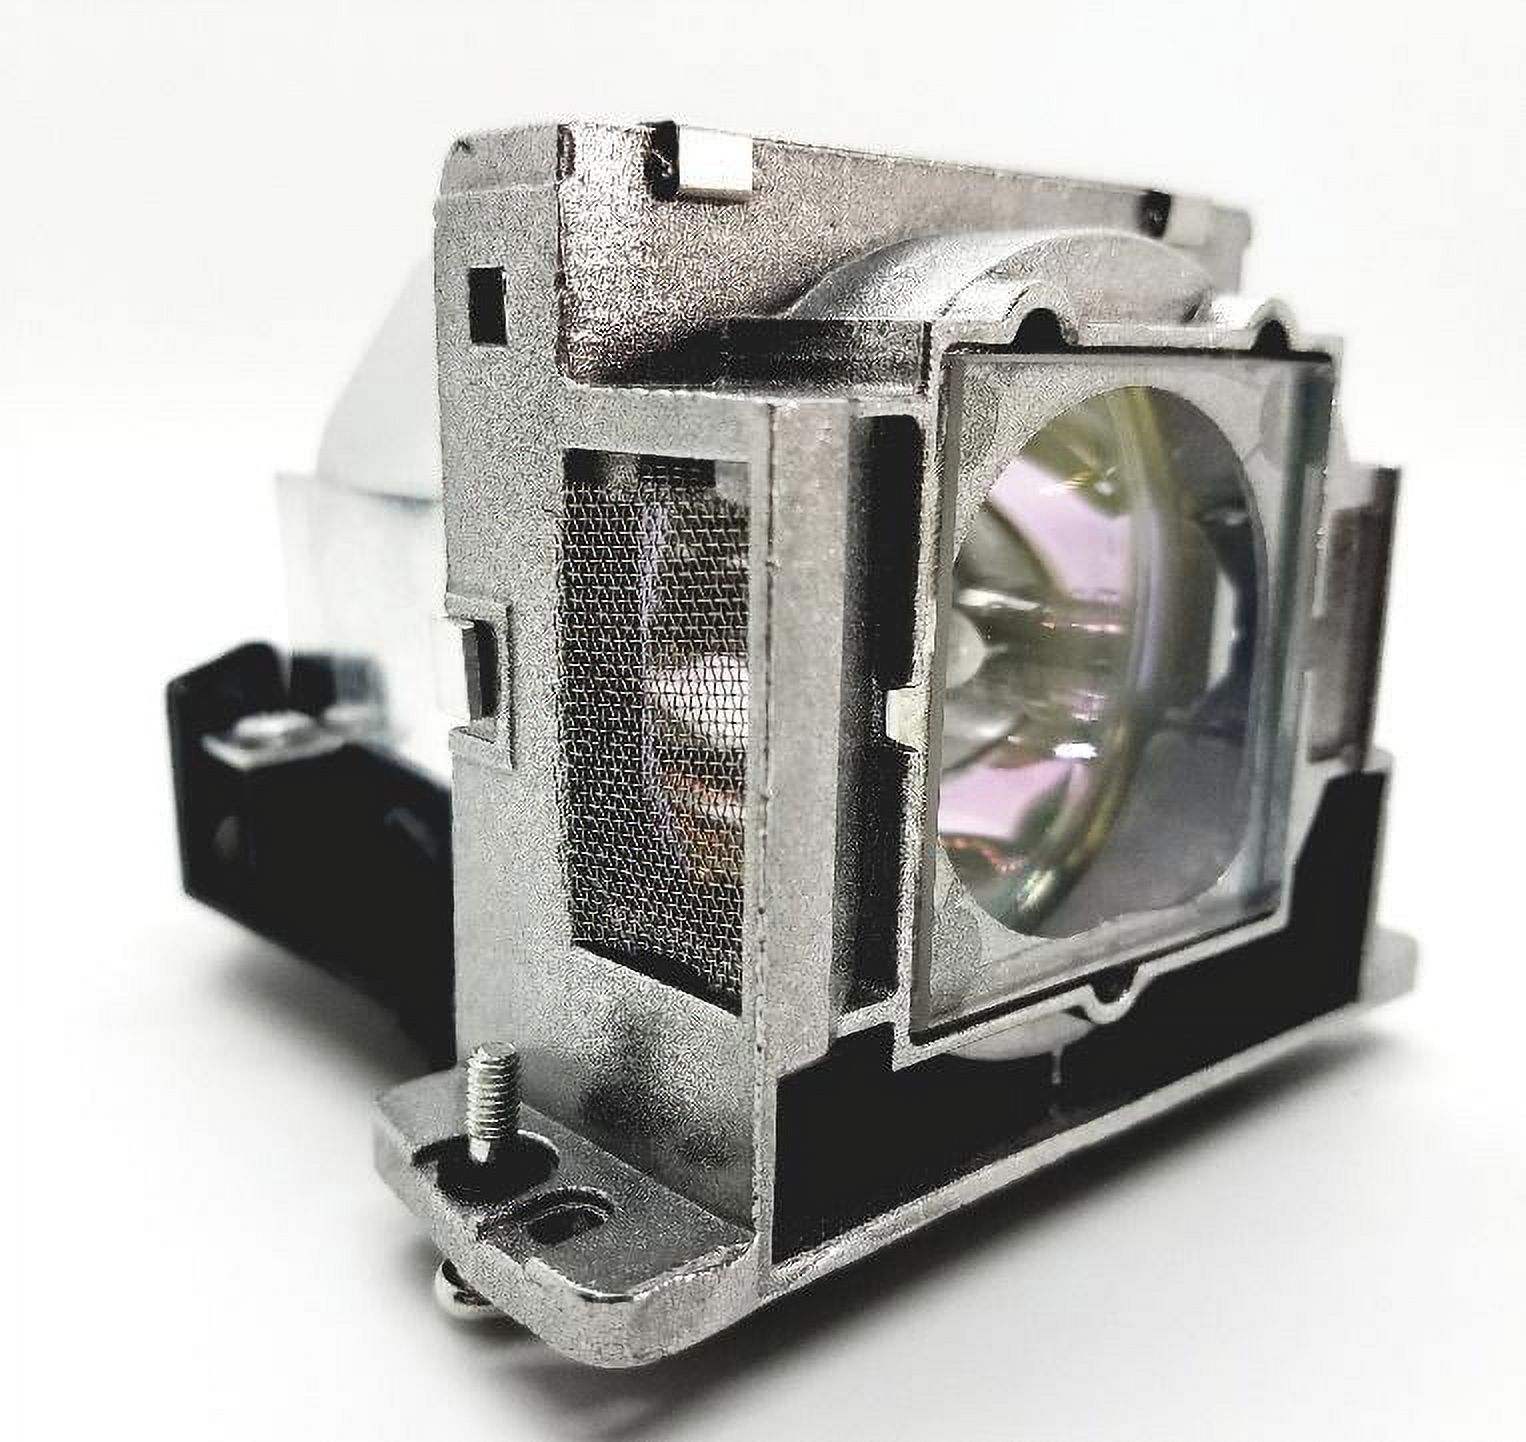 Osram PVIP Replacement Lamp & Housing for the Mitsubishi LVP-XD480U Projector - image 2 of 6